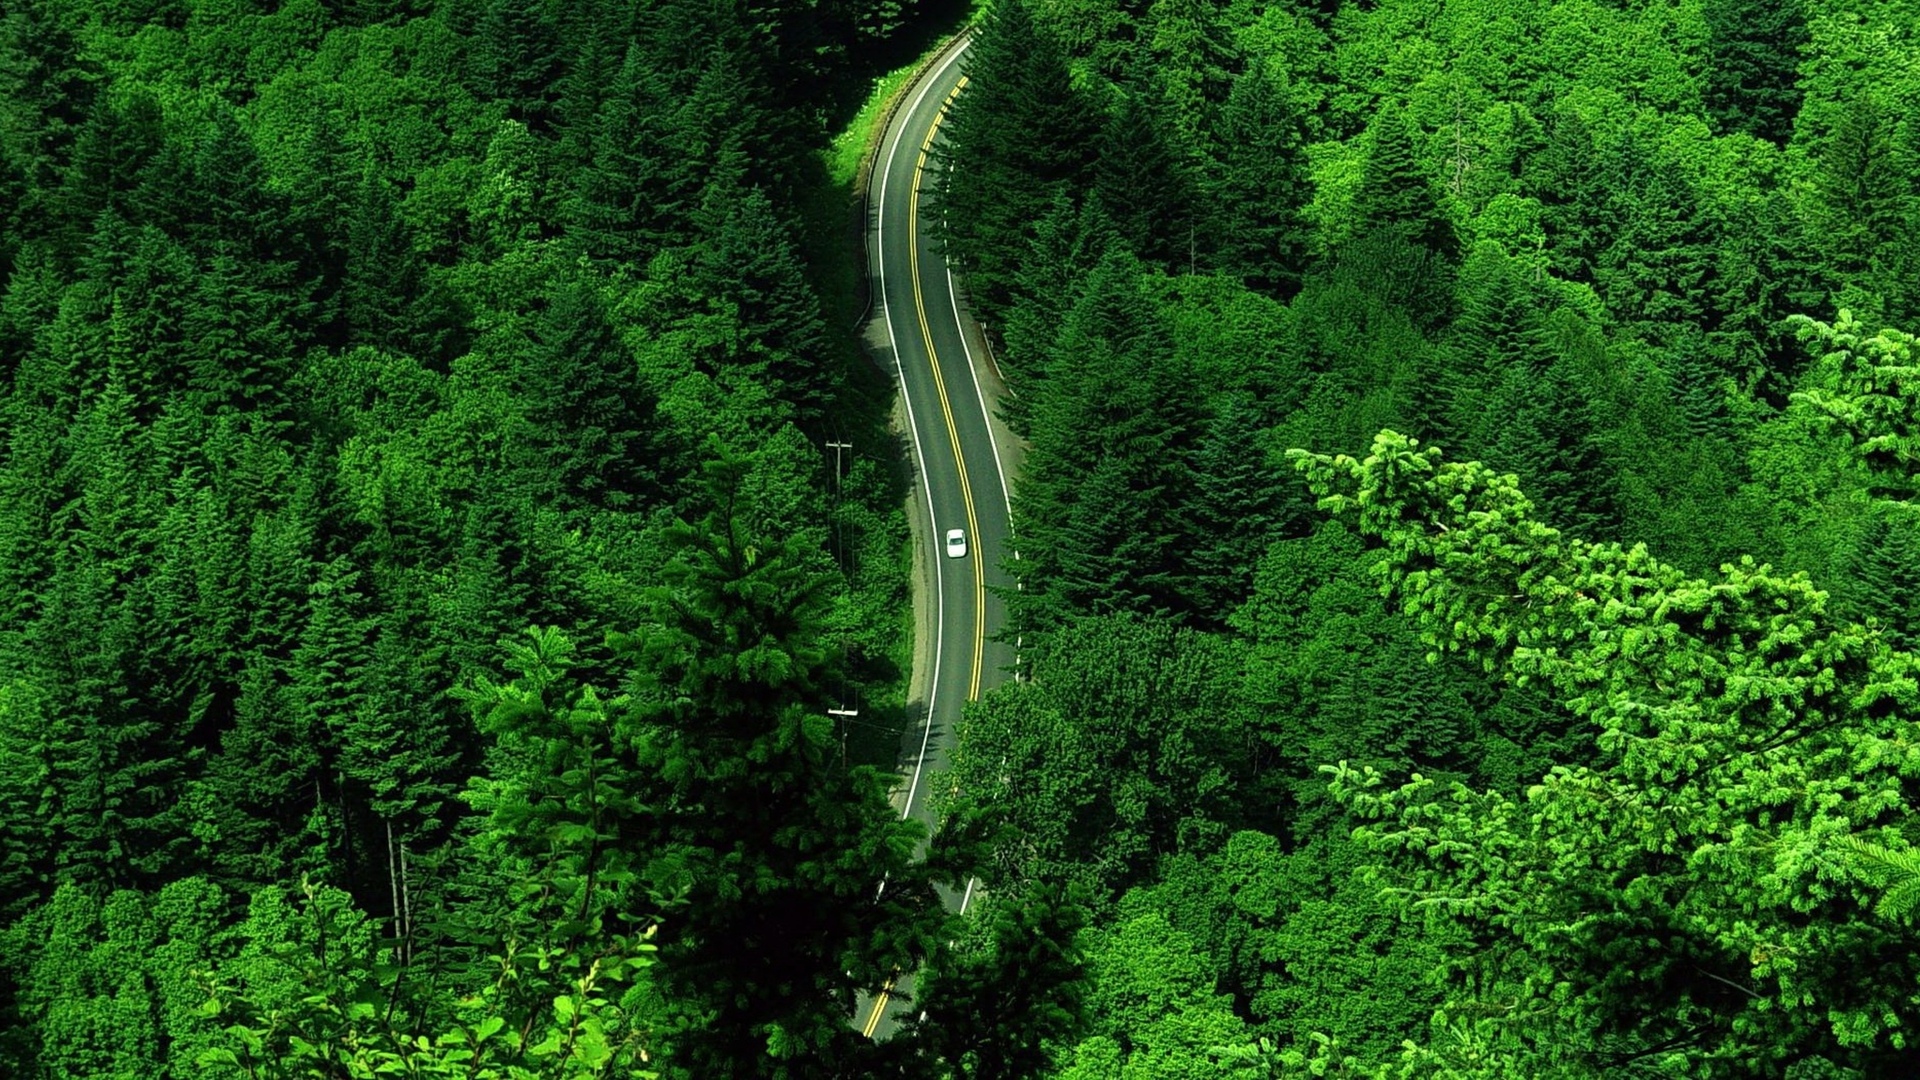 General 1920x1080 forest road landscape aerial view